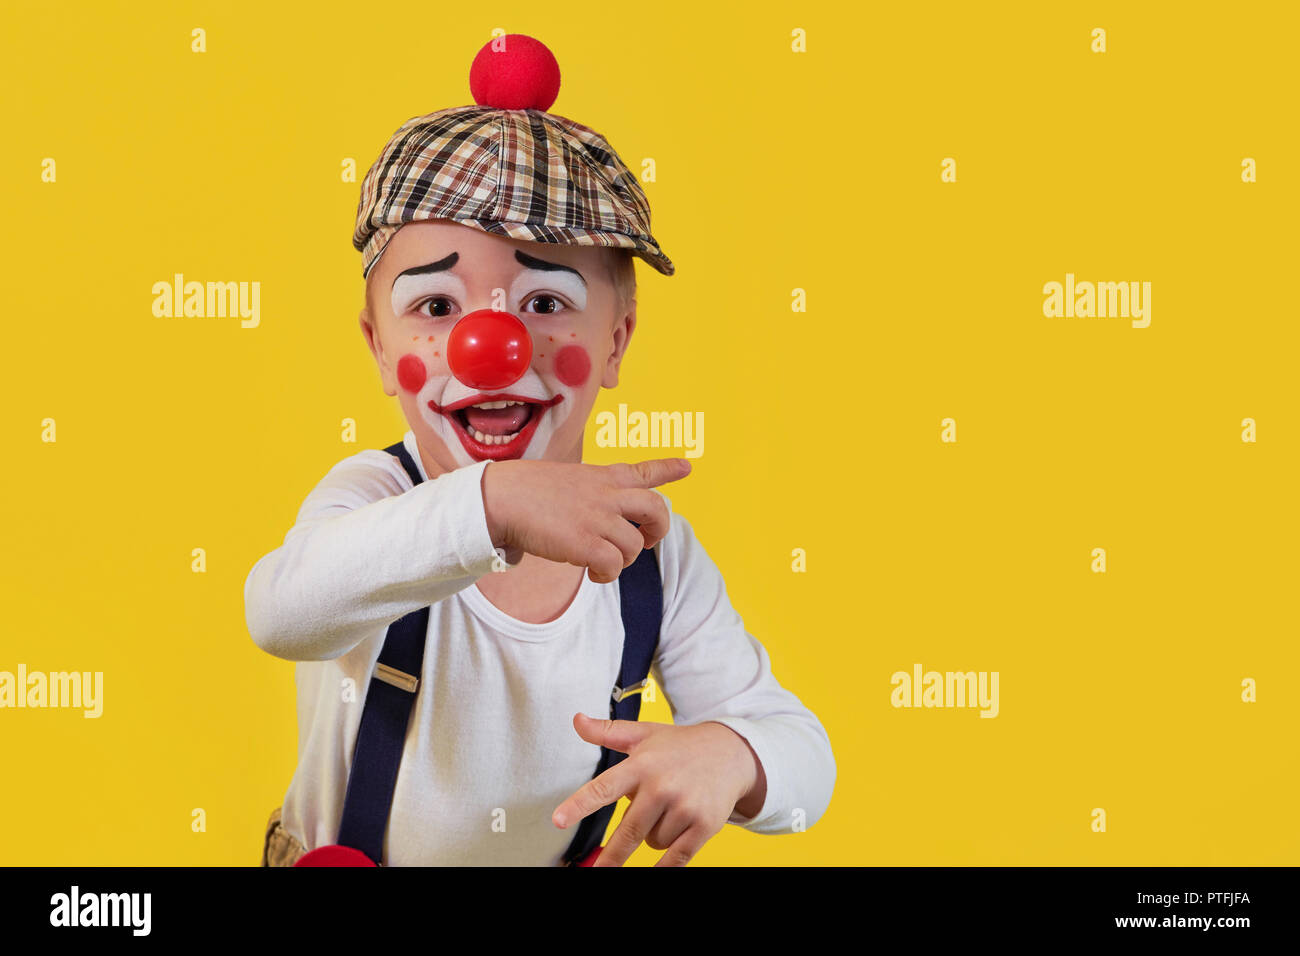 Child clown smile shows a finger copy space area on yellow background. Funny little clown with red nose. Concept birthday, day 1 april, party. Beautiful portrait kid jester in studio. Stock Photo